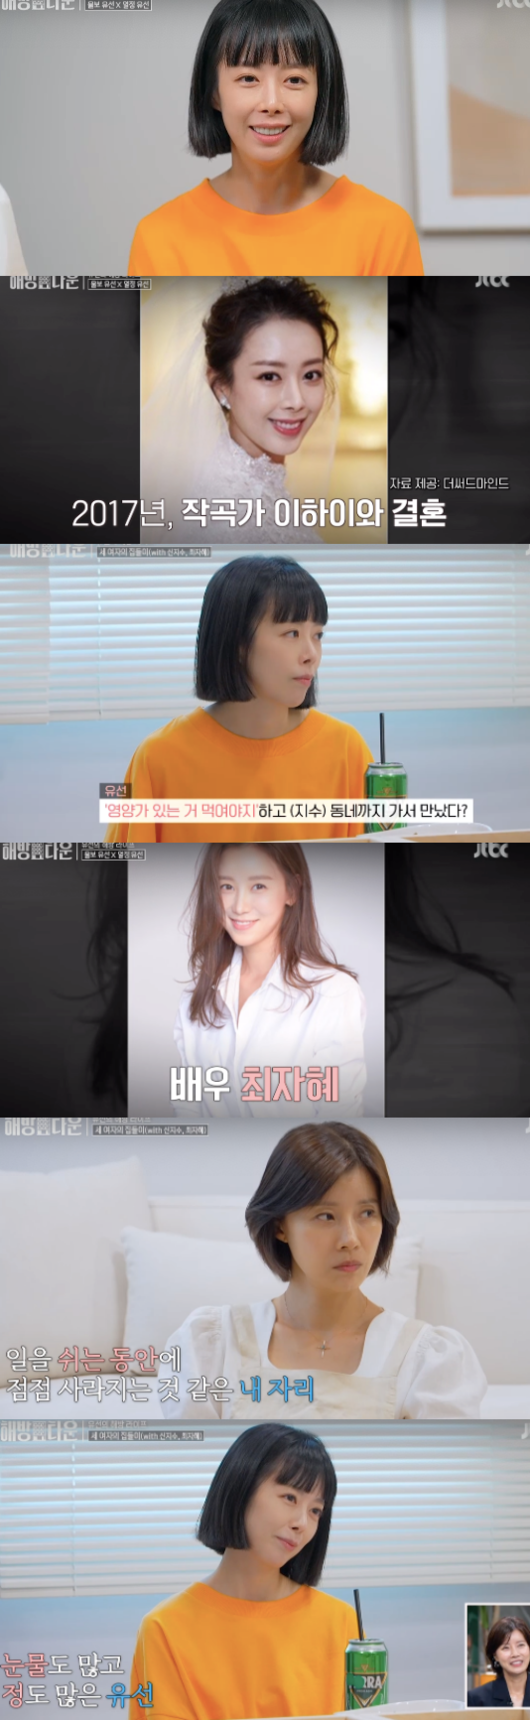 Actor Shin JiSoo, who was so sorry that Yoo Sun was going to visit his house at Feminist Movement Town, was revealed.The appearance of the flesh falling out of the parenting attracted attention.On the 24th, JTBC entertainment Feminist movement town, Yoo Sun had a strong time with his best juniors, Shin JiSoo and Choi Ja-hye.When asked why he needed a feminist movement, he said, It is not a multi-style.I gave up on my own, and I was able to handle it, just my work and family, and naturally gave up on things. In the end, I gave up on my own, and when I worked, I was faithful to the role of Actor, concentrating on my wife and mother at home, and my ranking was pushed out.I want to have time to be the first, to have time to fill me in, he said. I want to remind myself of my previous passion and make time to find me again.A long-awaited Feminist movement day was drawn.Yoo Sun said, The house that always comes out is going to be so different. As soon as I moved in the car and wore sunglasses, I exploded my unimaginable rap skills.I started to like hip-hop because I have the charm of singing and rap in my memories, he said.Finally, he moved into Feminist movement town.Yoo Sun, who moved his luggage, said, I do not know why I am tearing, it is so good. Tears, it is my own space that I had for the first time after marriage.It was a long time since I had a modifier for me, said Yoo Sun, who was impressed by the feminist movement town for Yoo Sun only.Yoo Sun then showed a busy appearance and prepared a steamed dish.I dont have time to spend with friends these days when my private life has disappeared, said Yoo Sun, and Im going to invite friends who promised me just words.She then invited Actor Shin JiSoo and Choi Ja-hye, who were competing with composer Yi Yi and her daughter in 2017.Choi Ja-hye also said she was the mother of two sons, a same age and marriage.The three men, who have been building friendships for more than 10 years, said, It has been so long since the three have met.In particular, Shin JiSoo said that the two of them were not down when they saw him, the child raises the child, and Shin JiSoos daughter said that her mothers gum.She carried her daughter up to 30 months.I thought JiSoo was going to be in the neighborhood to feed something nutritious, said Yoo Sun, and Choi Ja-hye, I thought it would take a complete depression to give up because JiSoo could not afford to pay, but I am proud of what he does.Shin JiSoo said, There are times when I want to run away to the shooting scene.Choi Ja-hye said, I run under the kitchen. Shin JiSoo laughed, saying, I do not need a house like this. If I have a bathroom, it is a feminist movement.In particular, Shin JiSoo said, I always have a heart to thank my sister, and I was so excited about being great and good and having a sister.I wish I could have met you in the bathroom, she said, and they all cried and wept.On the other hand, Feminist movement town is an observational entertainment program that depicts married celebrities who have been in desperate need of time and space alone and returning to I before marriage.Feminist movement town broadcast screen capture